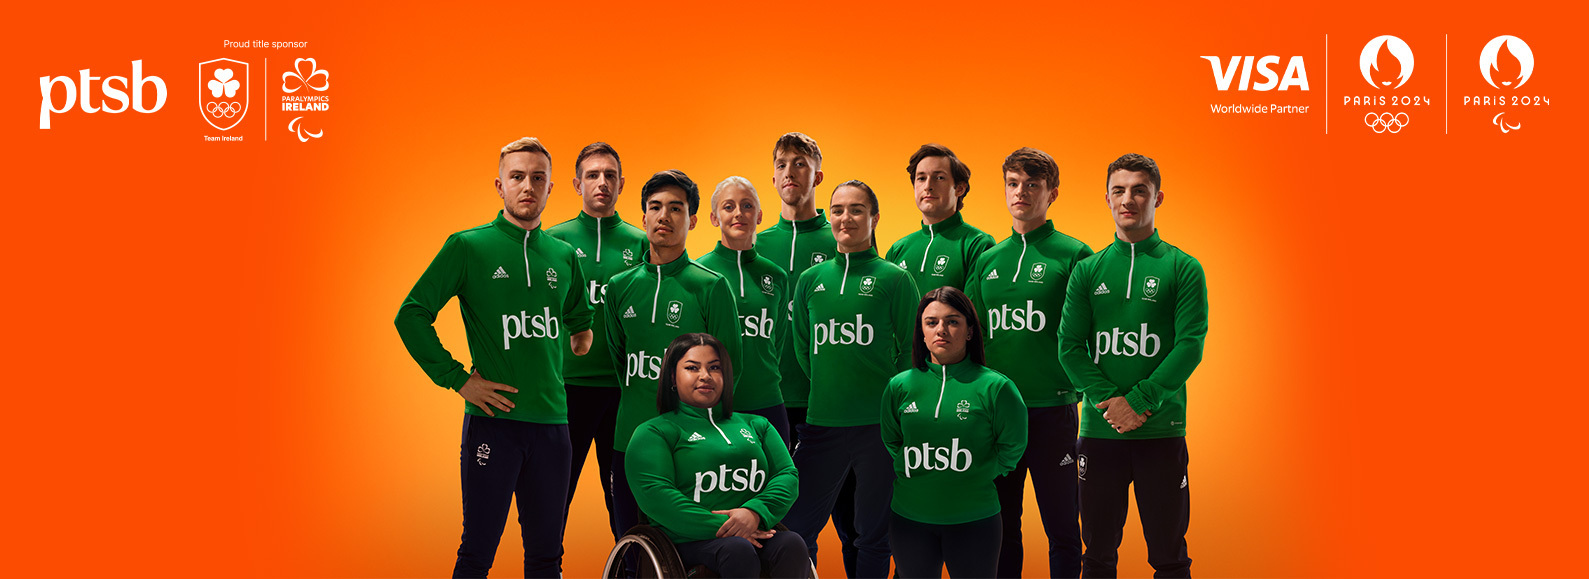 PTSB Bank sponsors Team Ireland at the Paris 2024 Olympic and Paralympic Games - visa worldwide partner and paris 2024 olympic logo